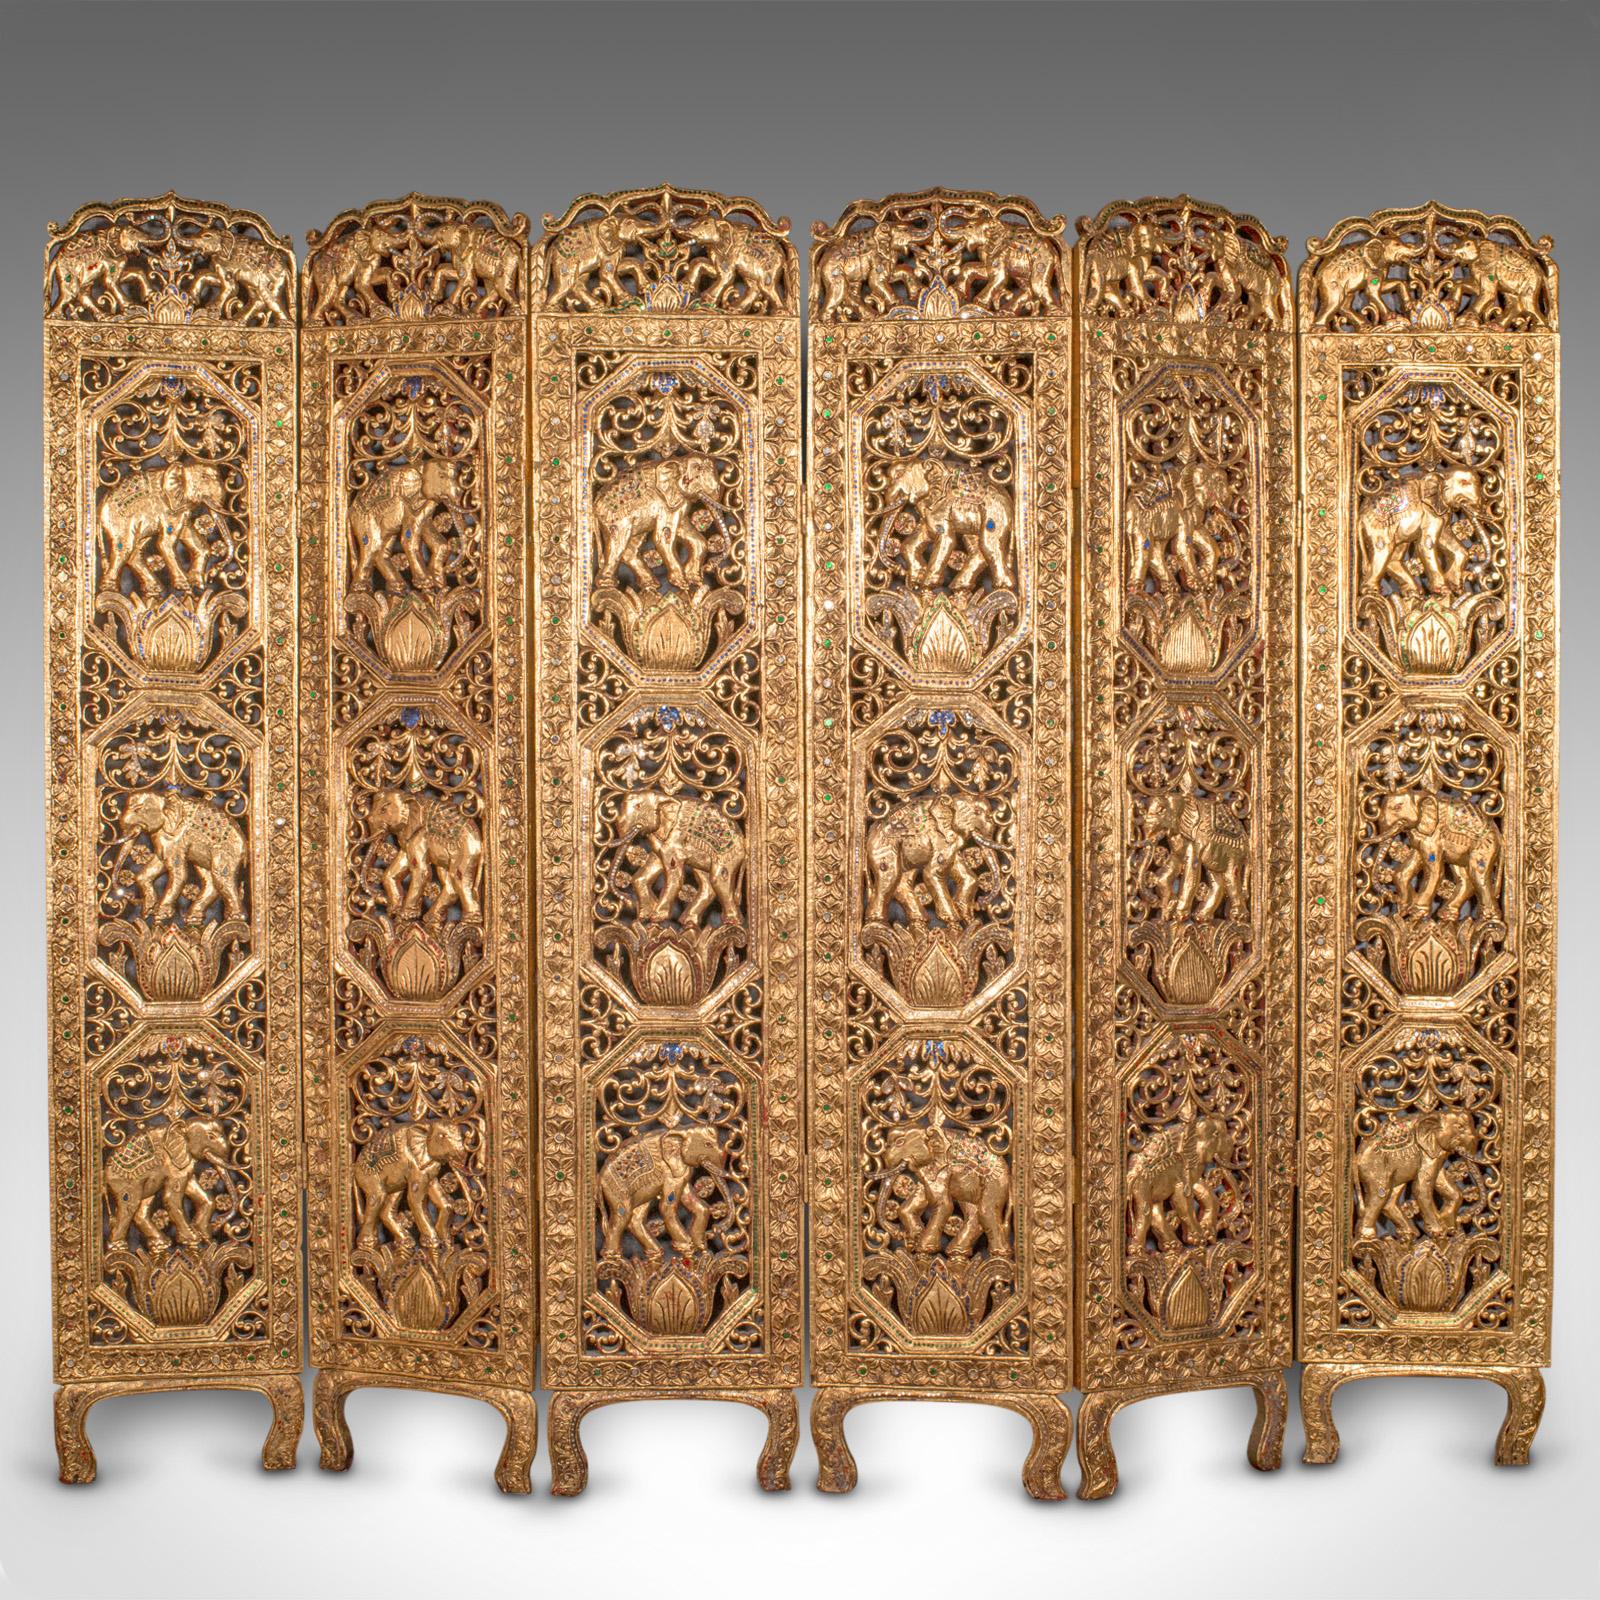 This is an antique ornate privacy screen. An Indian, gilt mahogany six panel room divider with elephant and gemstone decor, dating to the late Victorian period, circa 1900.
 
Striking hand carved privacy screen with dazzlingly ornate Indian